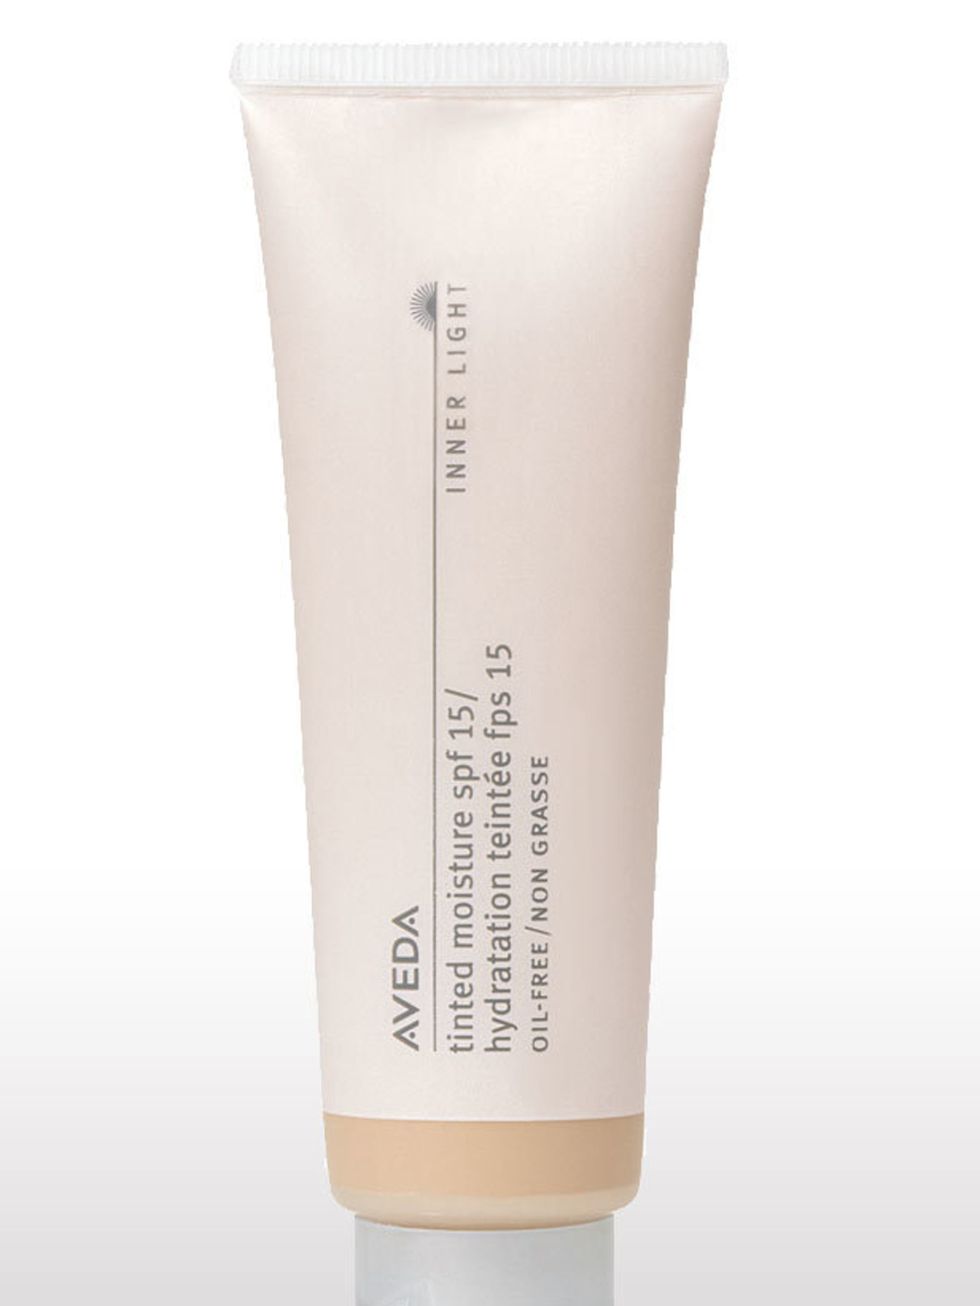 <p>A heavy foundation can be uncomfortable and clog skin when the weather gets warmer. Swap your regular foundation for a tinted moisturiser with an SPF such as Aveda Inner Light Tinted Moisture SPF15, £23, which is oil free so it wont clog pores but giv